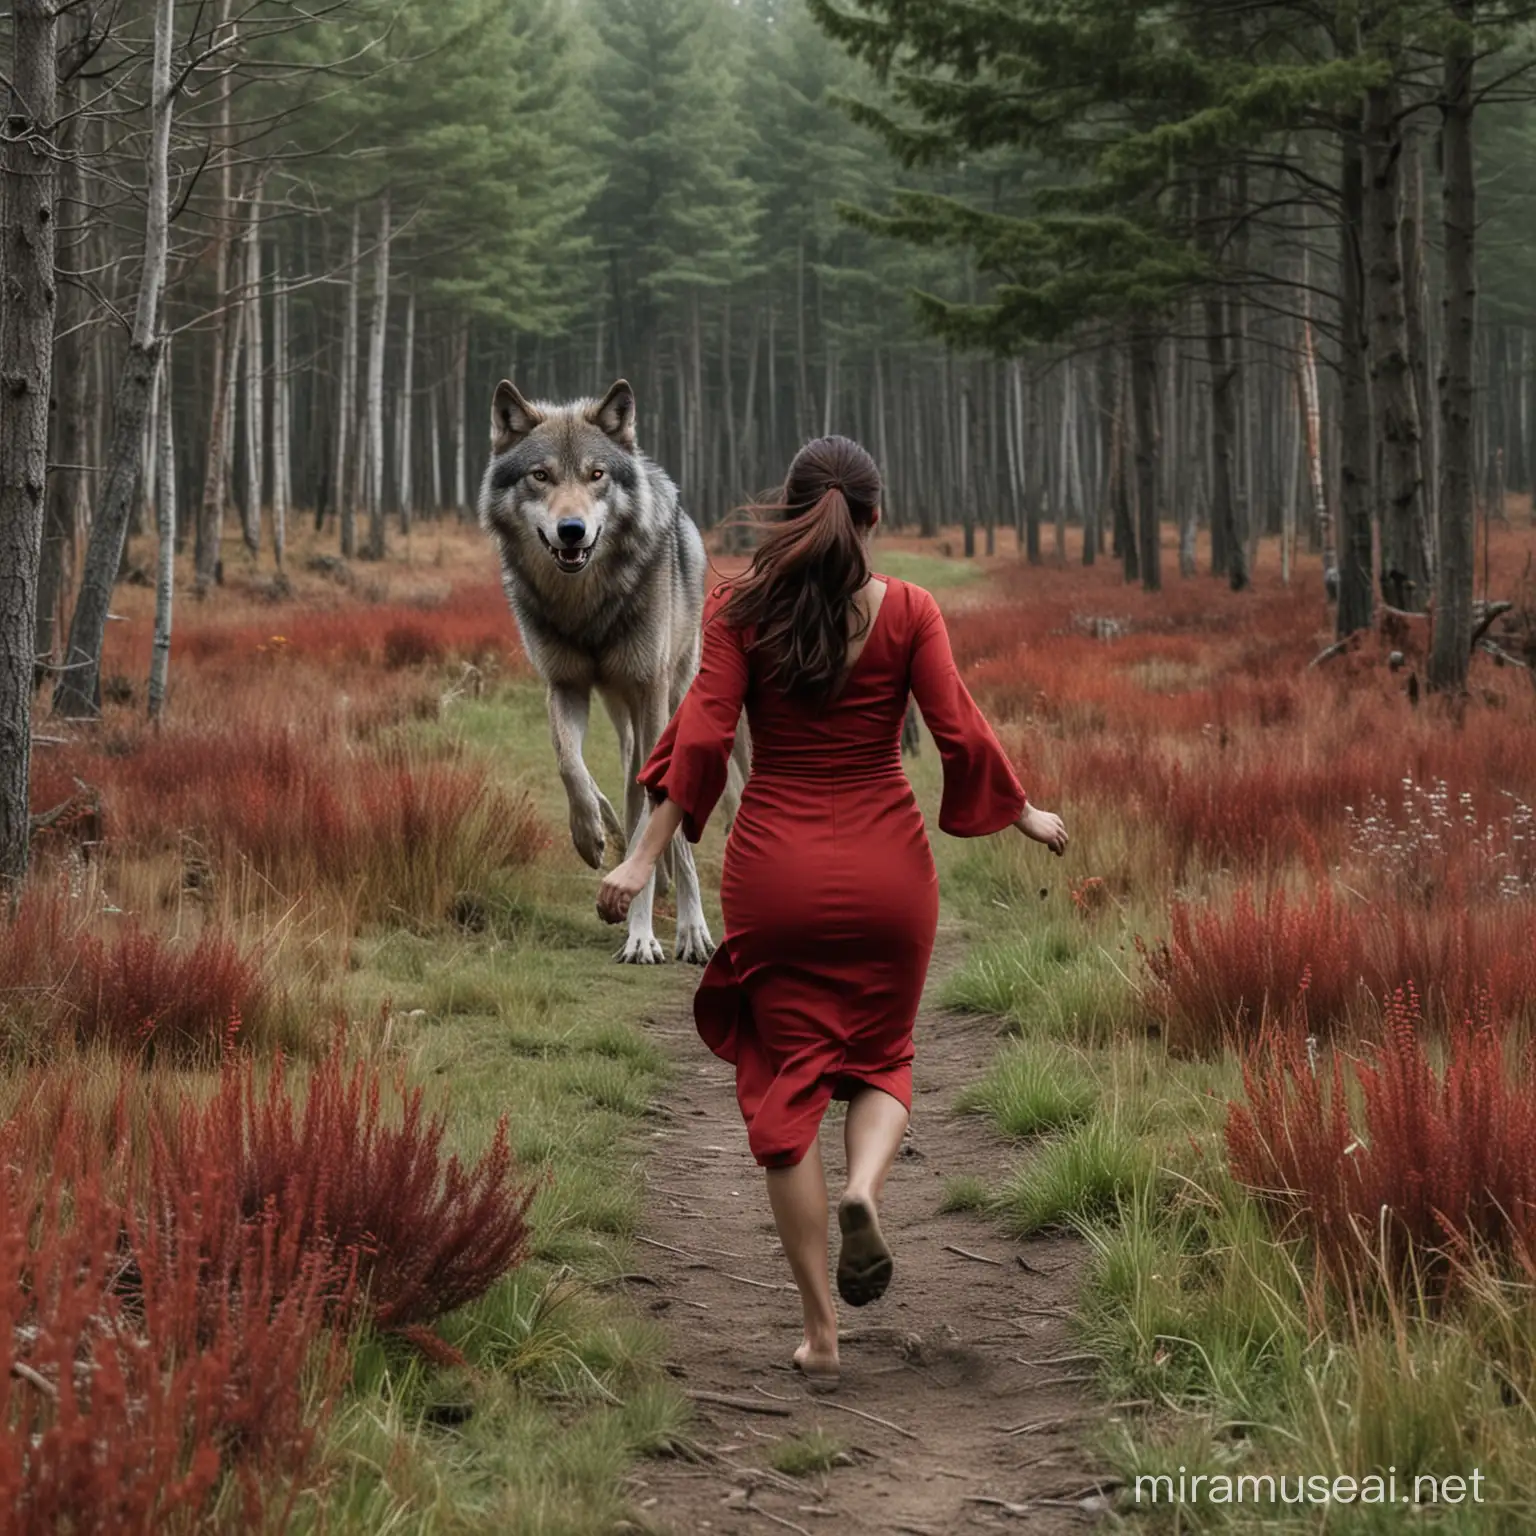 Large muscular grey wolf running away into a forrest , looking back at a woman in a dark red dress standing in a field outside the forrest